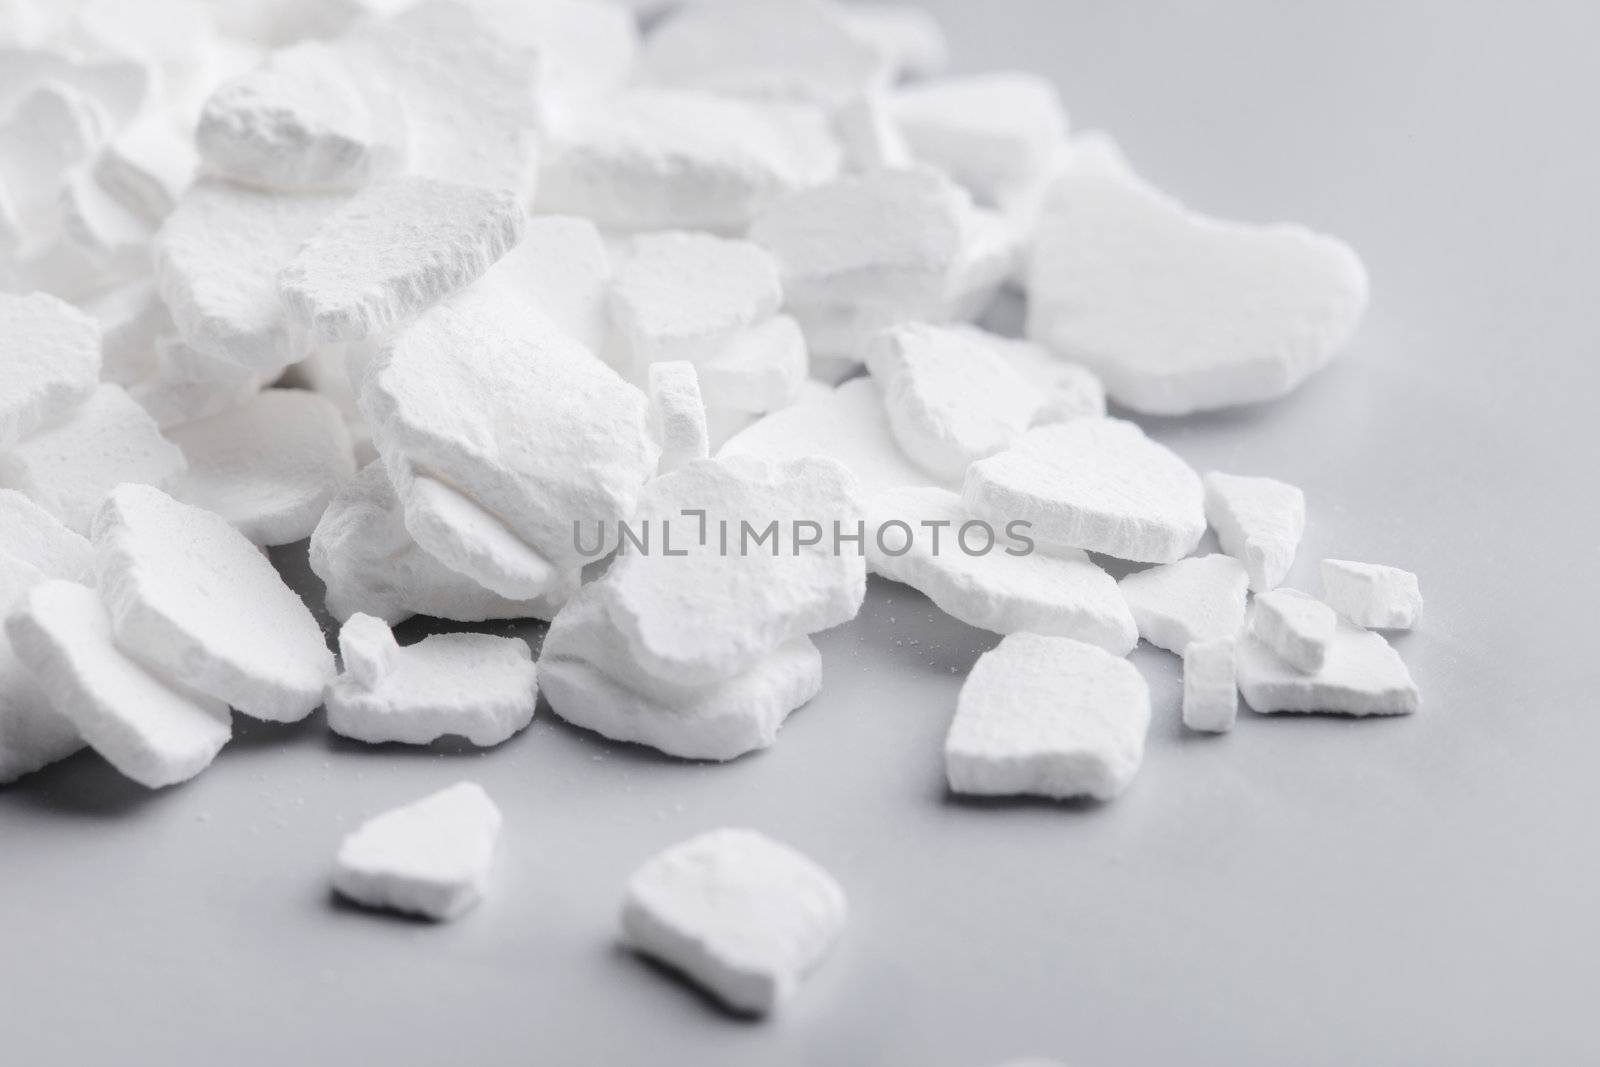 Calcium chloride (CaCl2) flakes. Common applications include brine for refrigeration plants, ice and dust control on roads, and desiccation. 